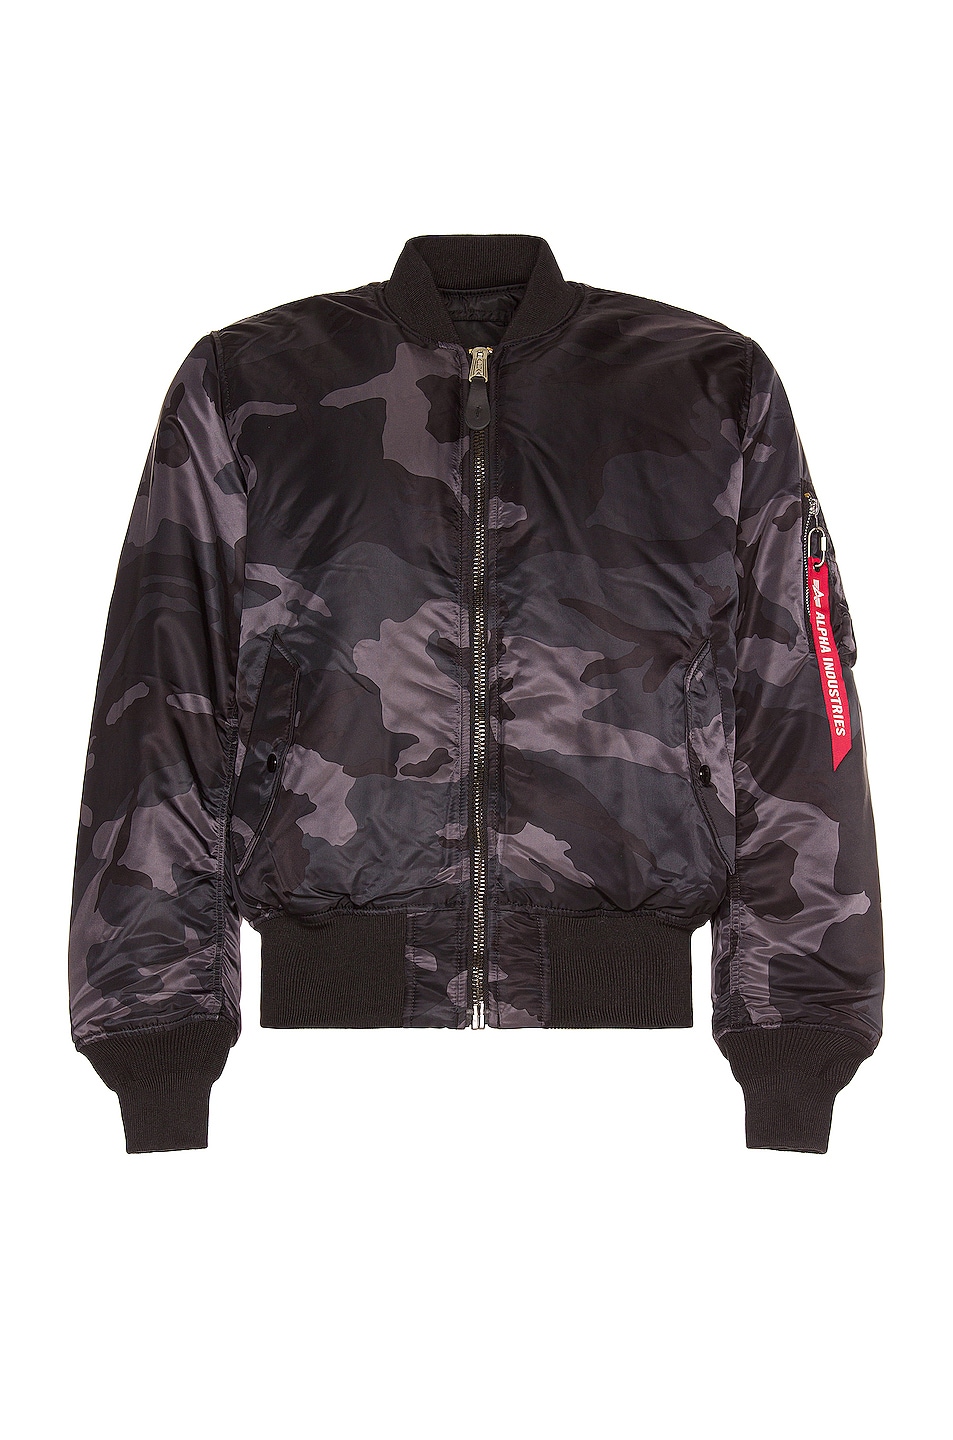 Image 1 of ALPHA INDUSTRIES MA-1 Bomber Jacket in Black Woodland Camo